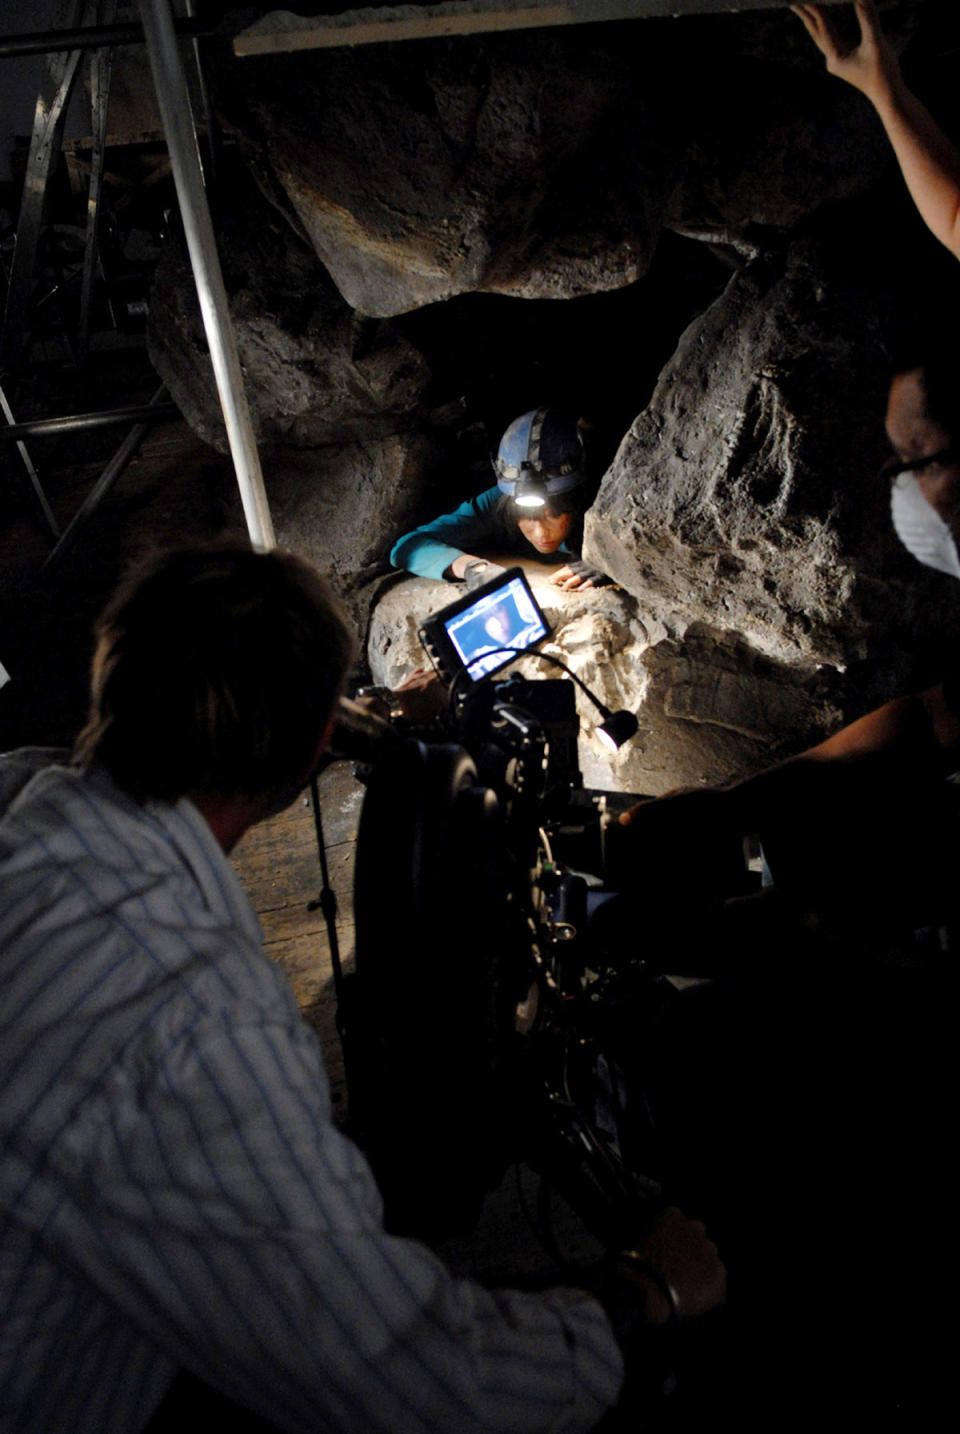 Behind the scenes of "The Descent Part 2"